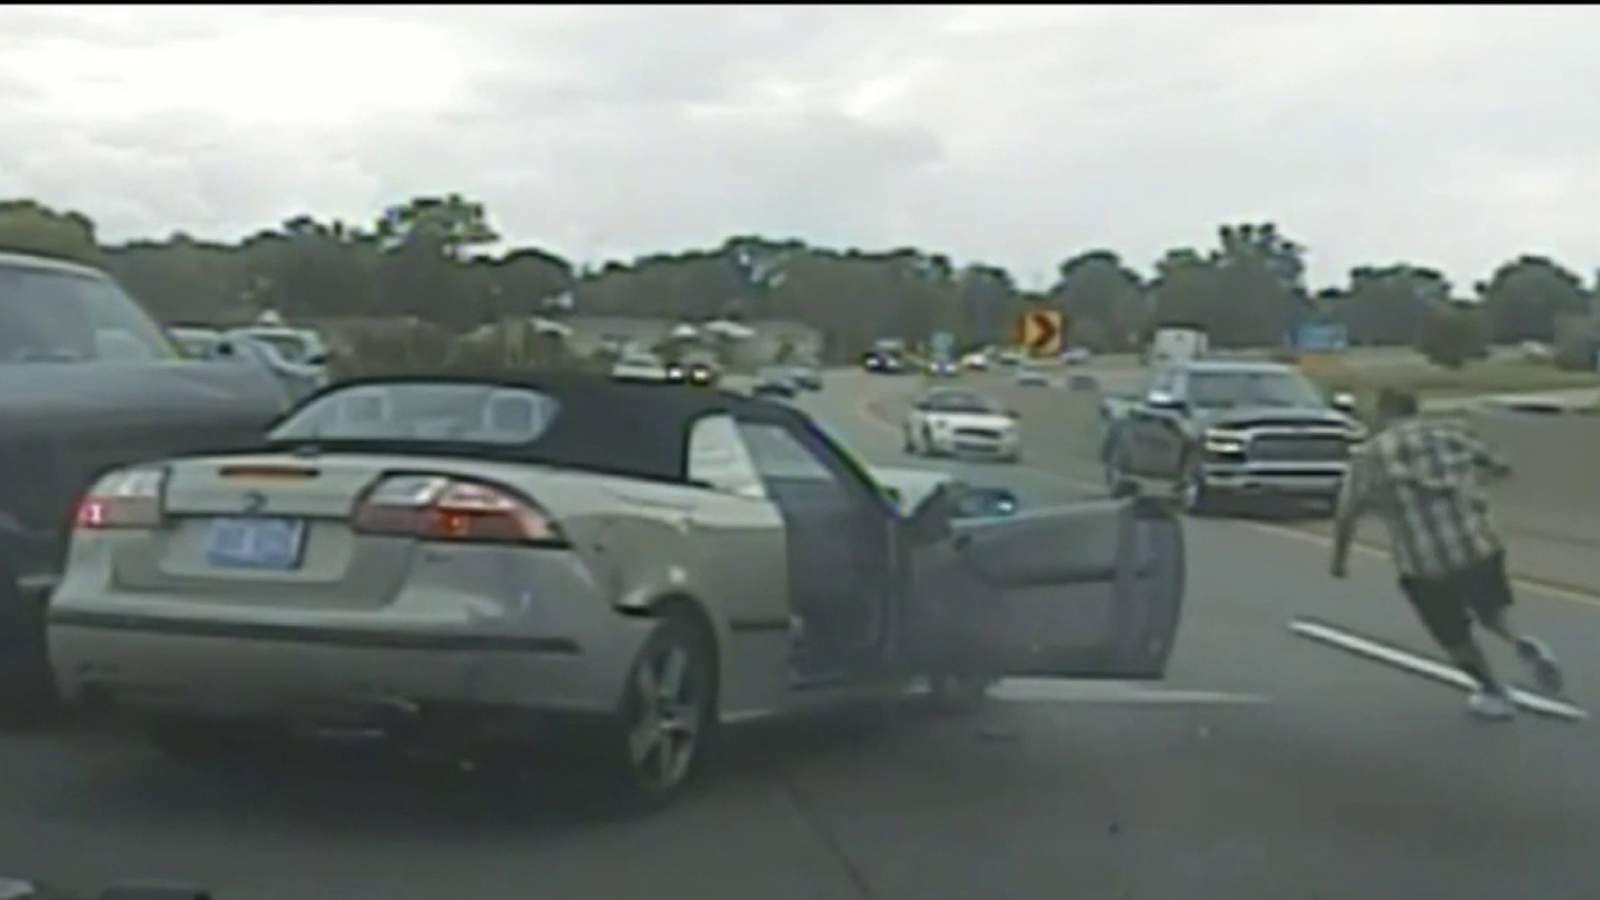 Video shows suspected shoplifter fleeing police on I-94 in Chesterfield Township